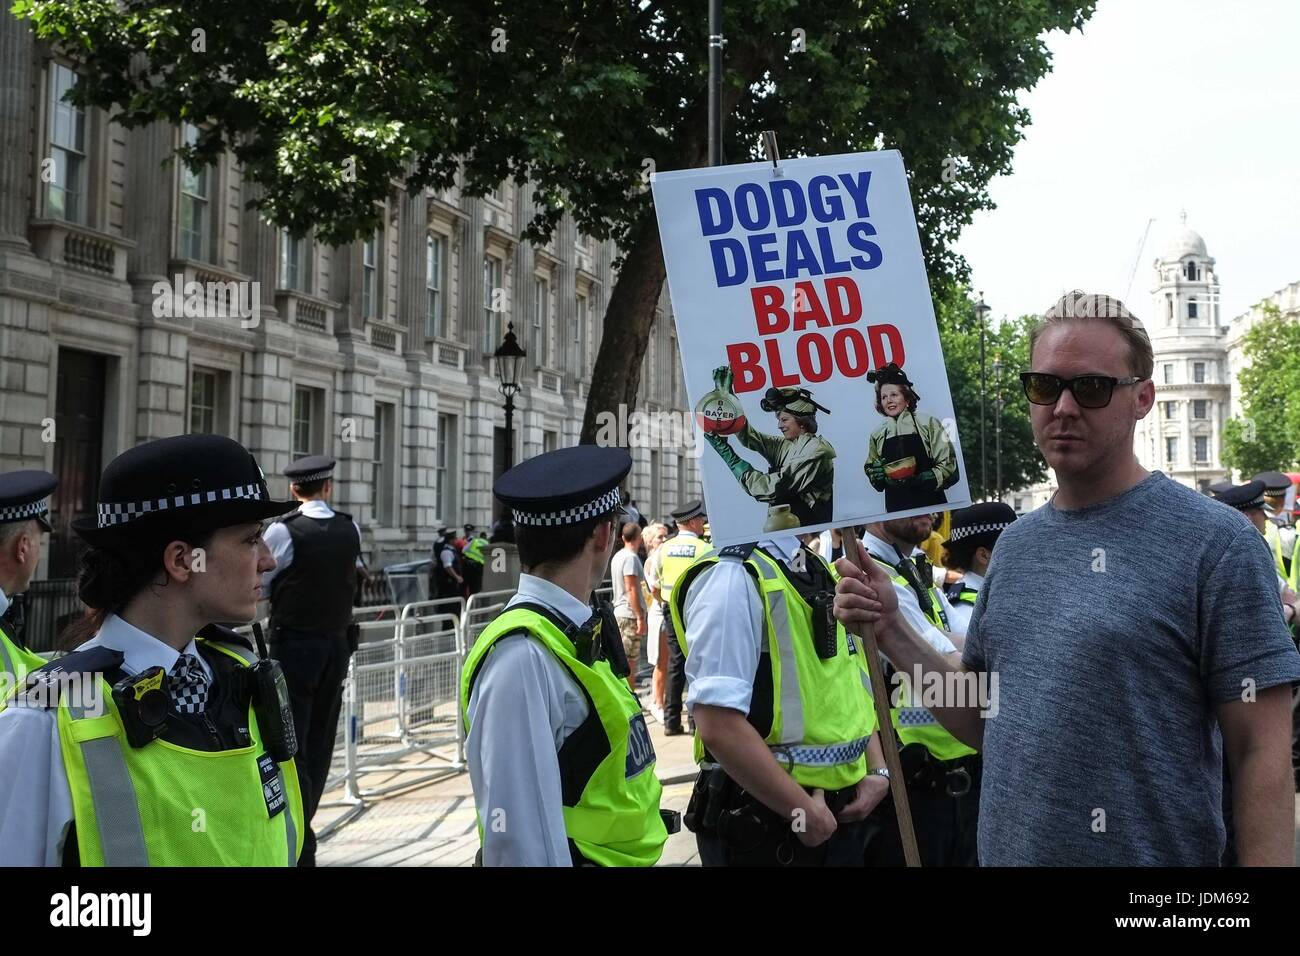 London, UK. 21st June, 2017. Protesters outside Downing Street.Day of Rage protesters march from Shepards Bush to Parliament demanding justice for the victims of the Grenfell Tower fire and Theresa Mays resignation. :Credit claire doherty Alamy/Live News. Stock Photo